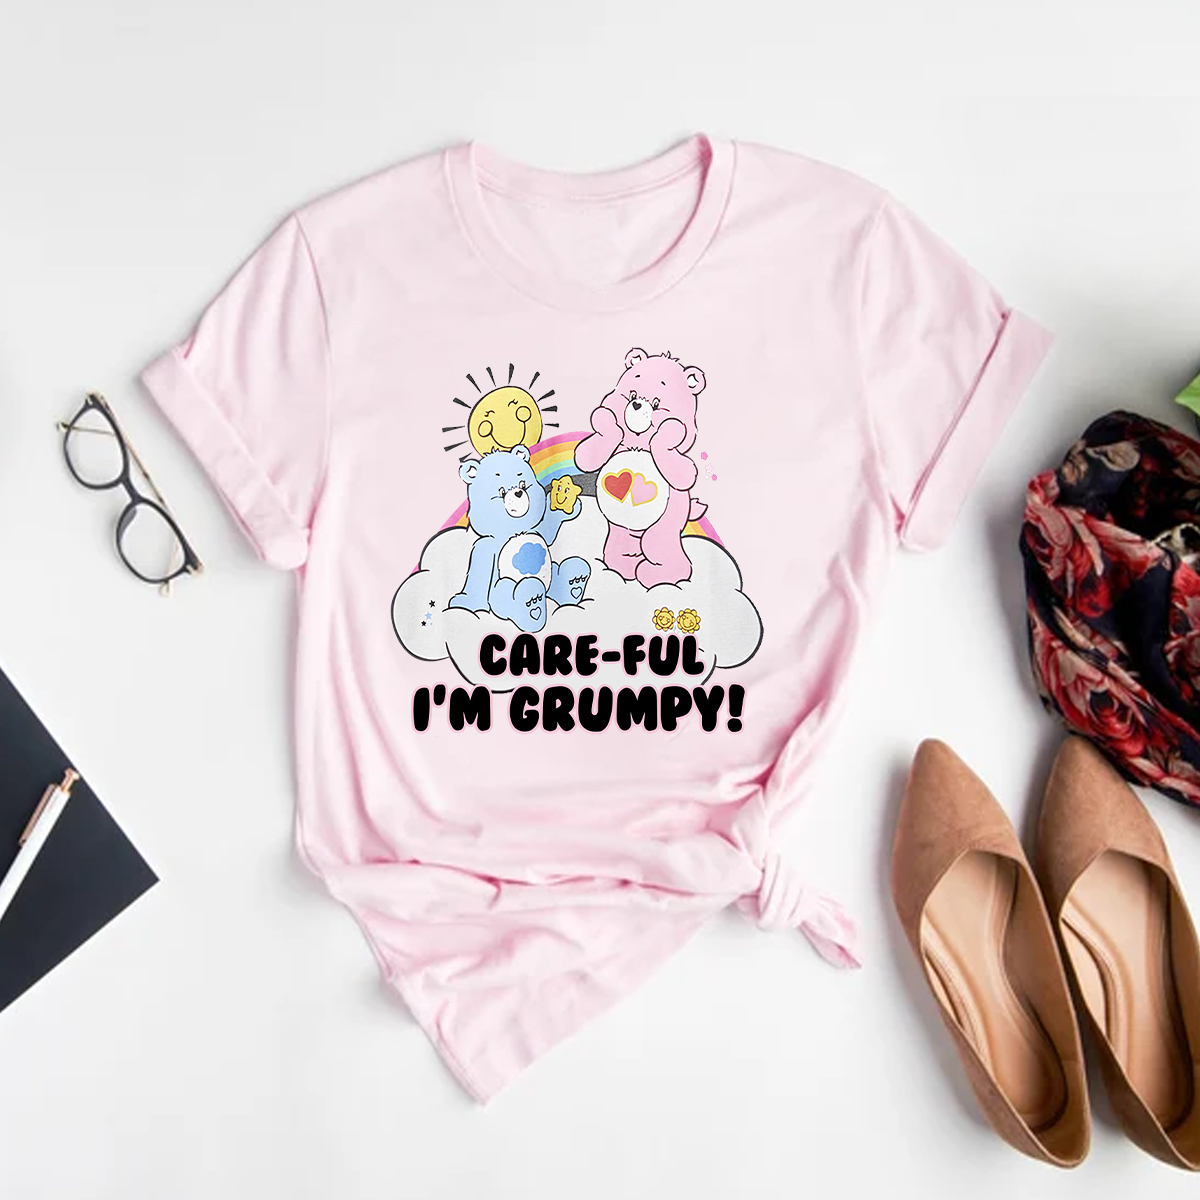 Personalized Care Bears Birthday Shirt, Careful Ism Grumpy shirt, Bears Family Matching Shirt, Bears Party Shirt for Care Groups Set